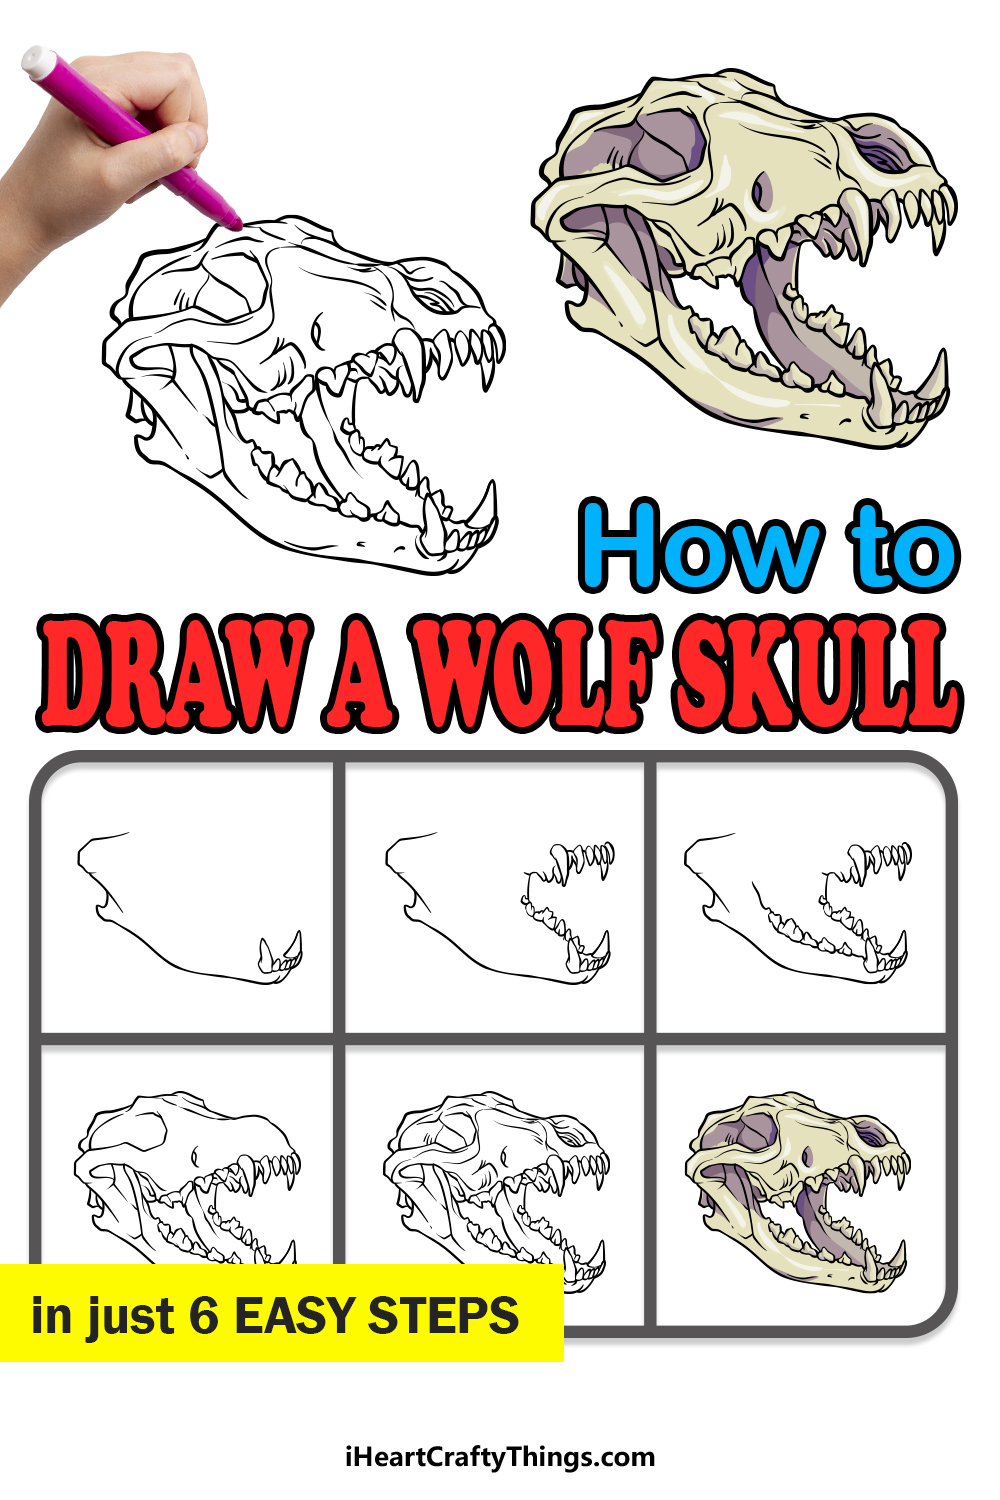 how to draw a Wolf Skull in 6 easy steps